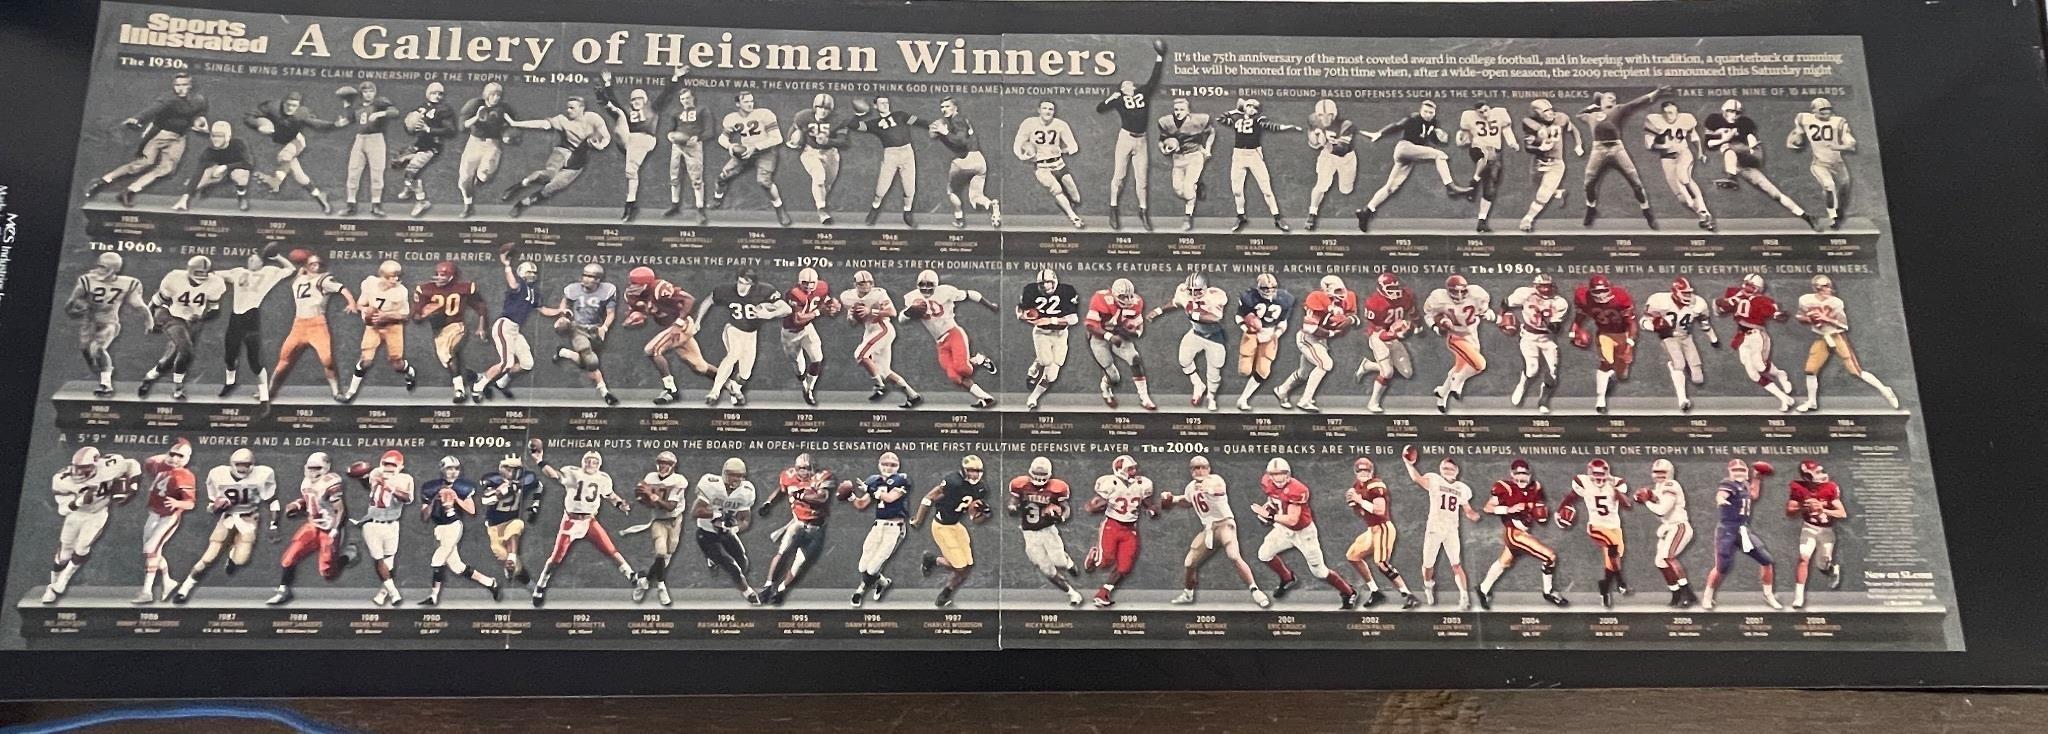 Sports Illustrated 75th Anniv. of Heisman Trophy